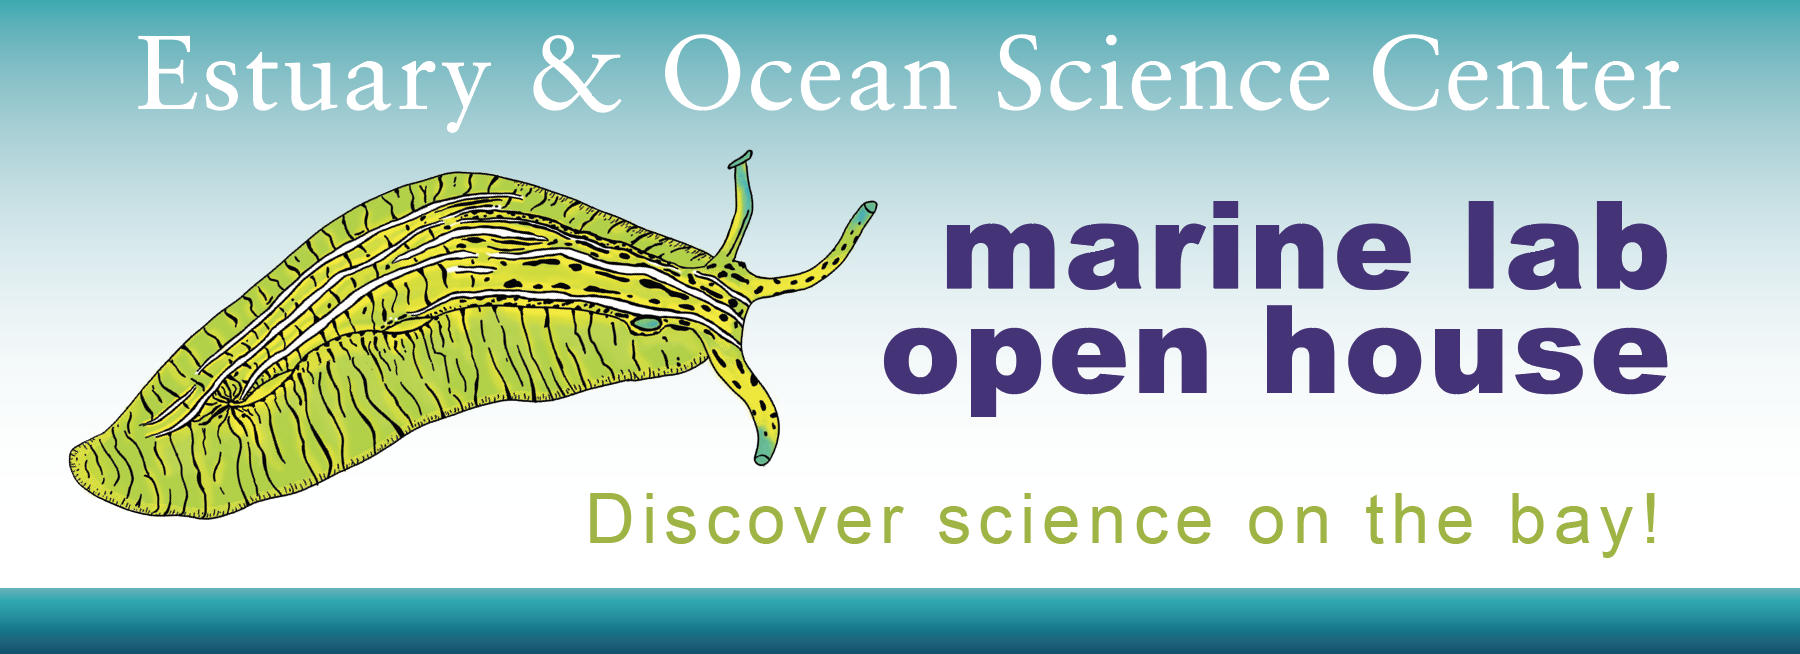 EOS Center marine lab open house, discover science on the bay